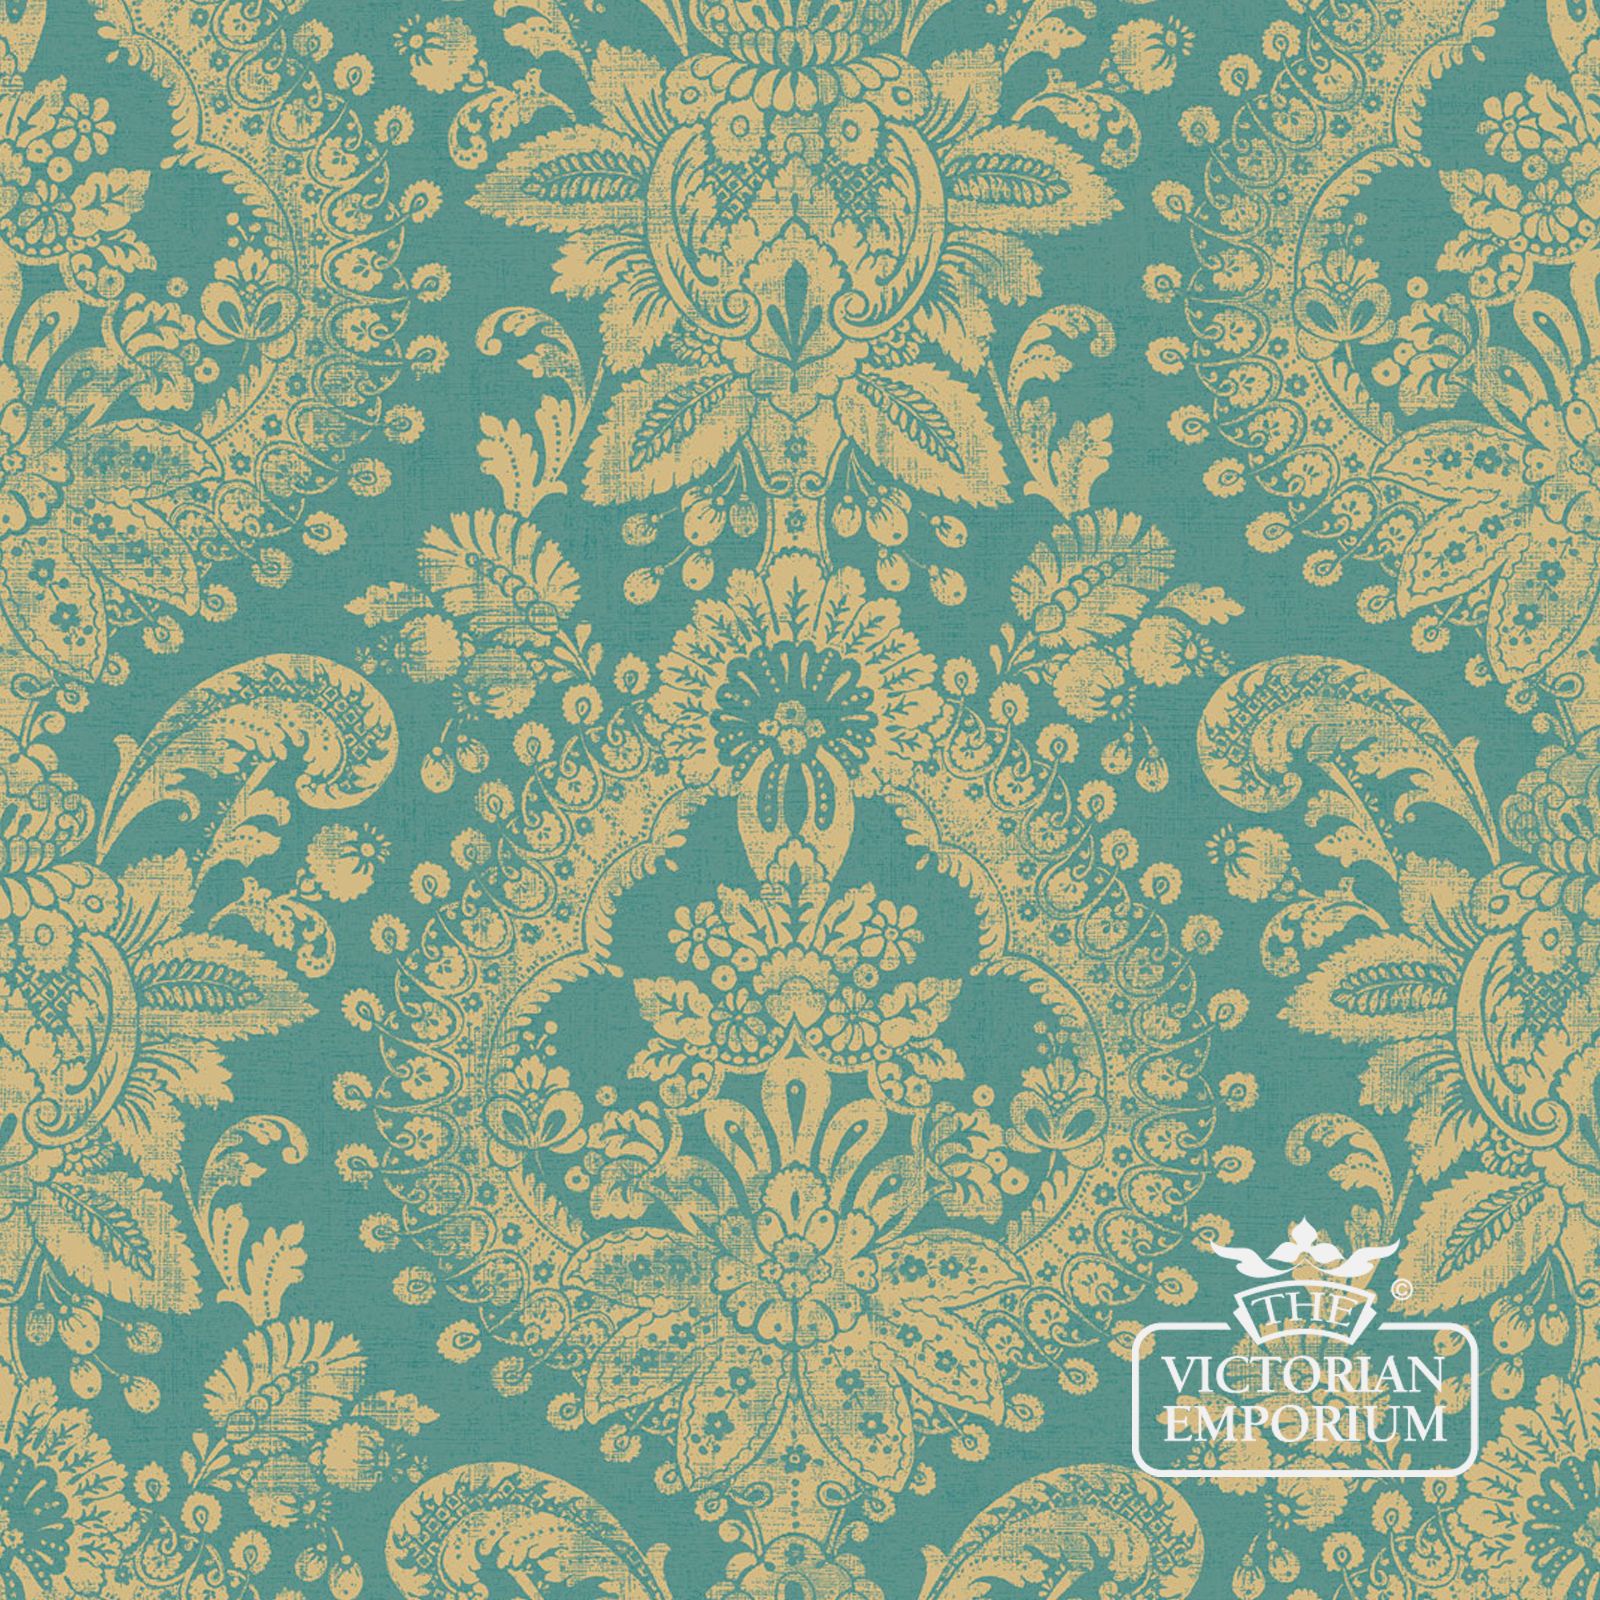 Boudoir Medallion Wallpaper in a choice of 2 colourways